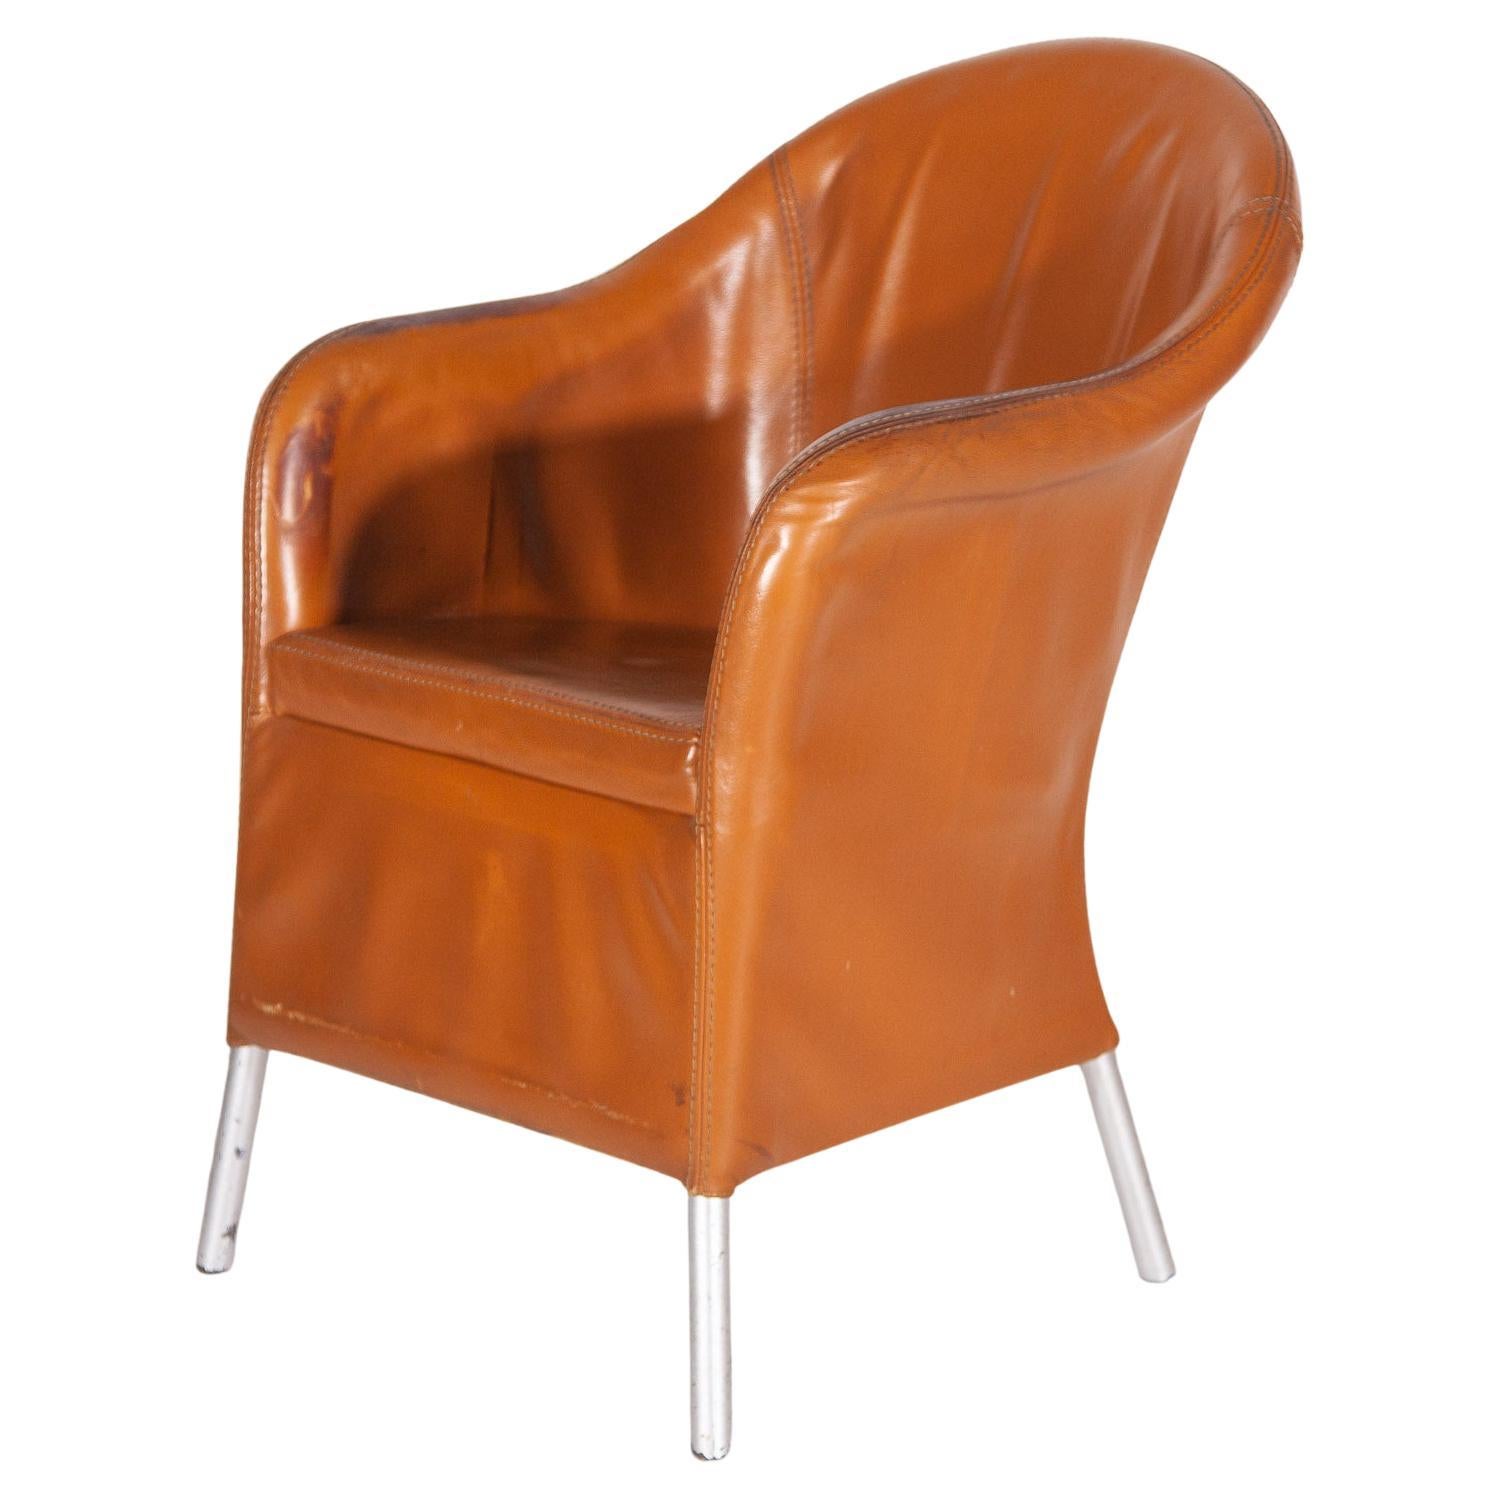 Durlet, made in Belgium Arm Chairs in Camel leather. For Sale